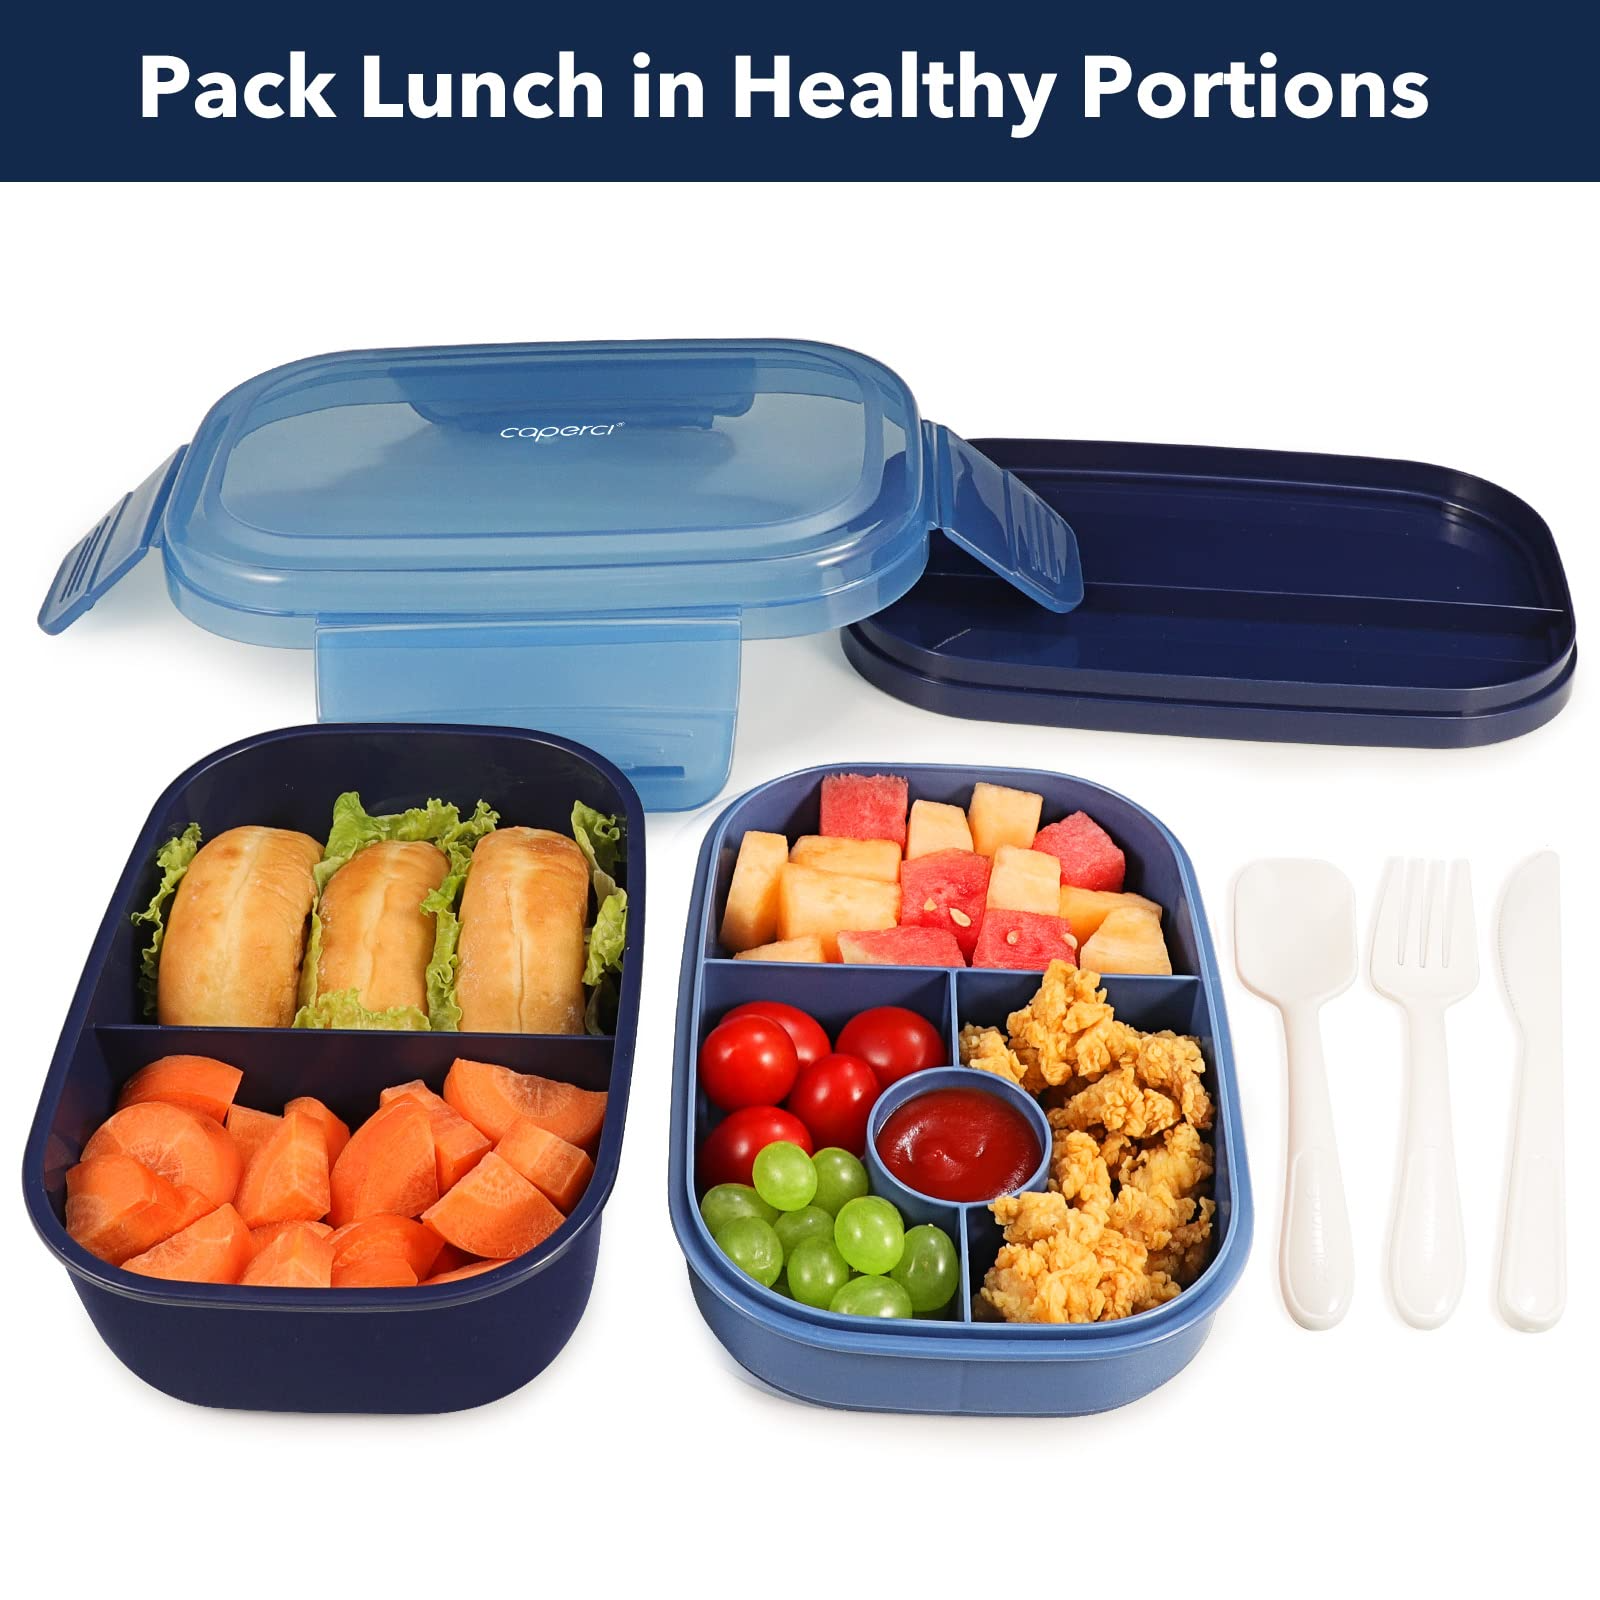 Caperci Bento Box for Kids - Large 4.8 Cups Lunch Box with Two Modular  Containers - 4 Compartments, Leak-Proof, Portable Handle,  Microwave/Dishwasher Safe, BPA-Free (Orchid/Light Cyan): Home & Kitchen 